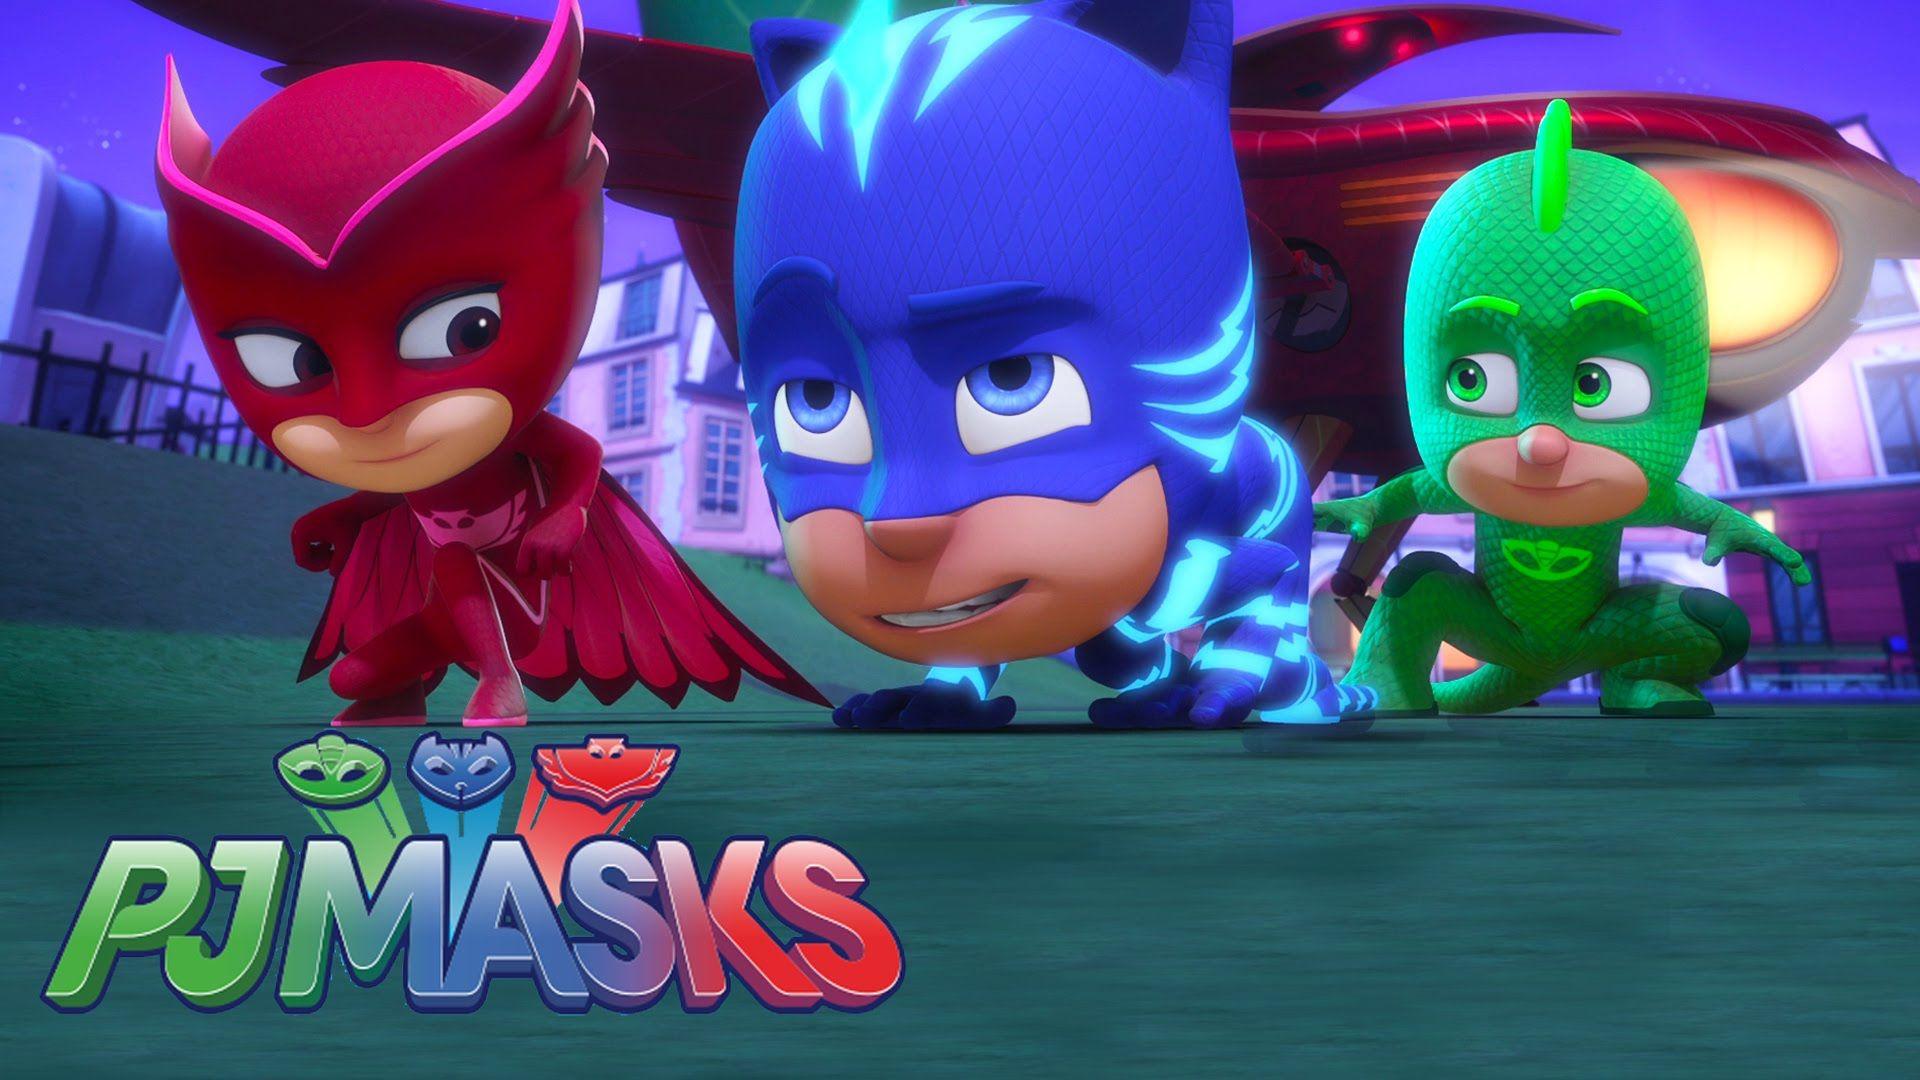 PJ Masks Your New Heroes!